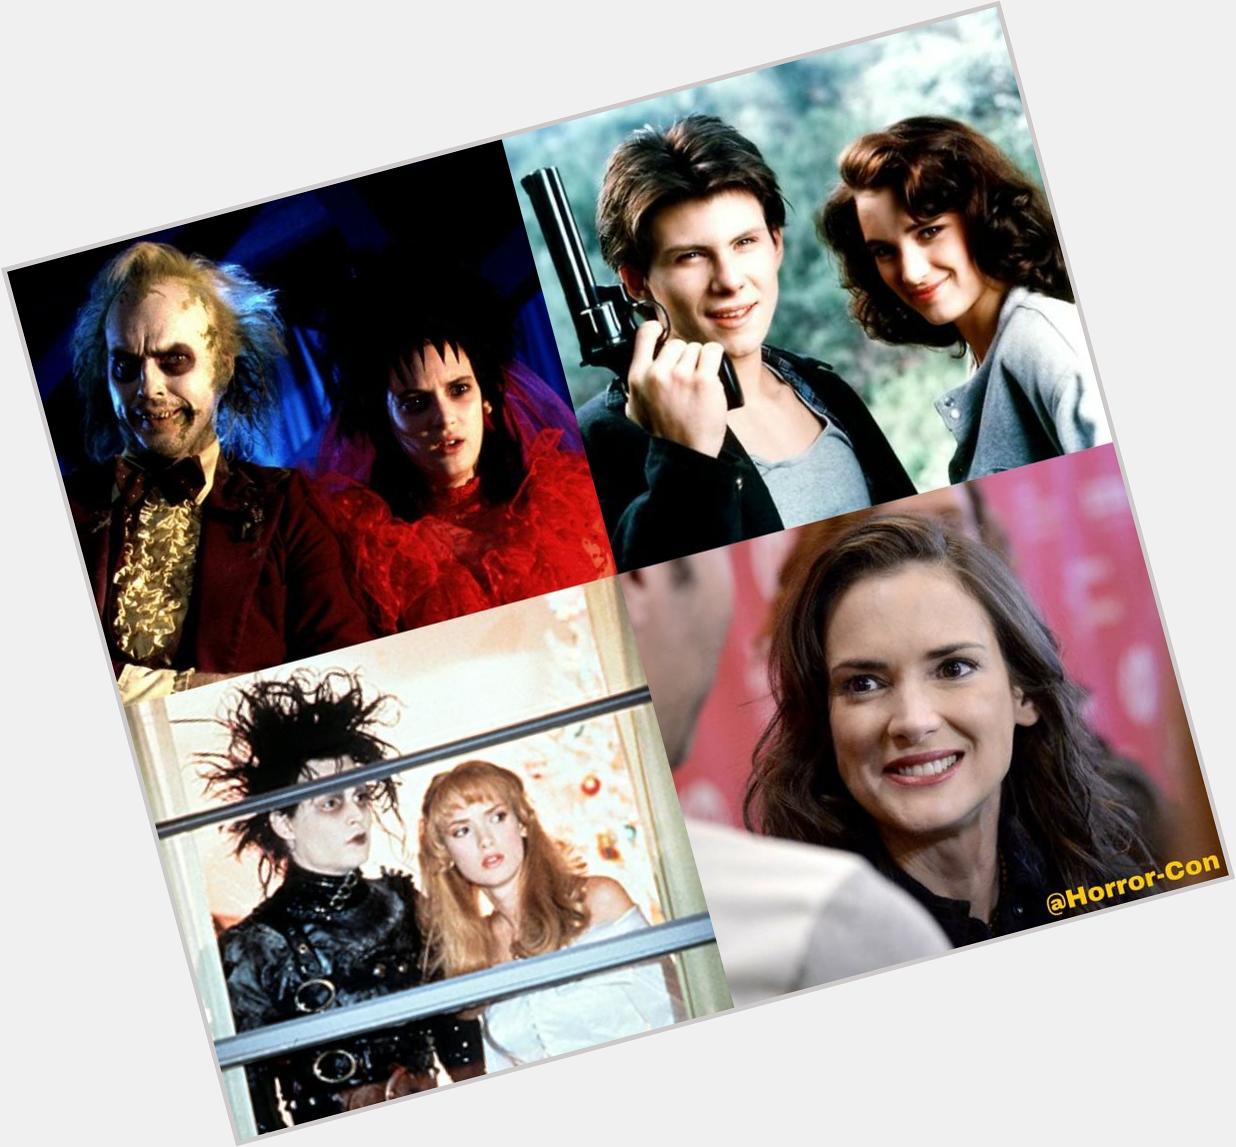 Happy Birthday to Winona Ryder! The Beetlejuice star celebrates her 44th today.  